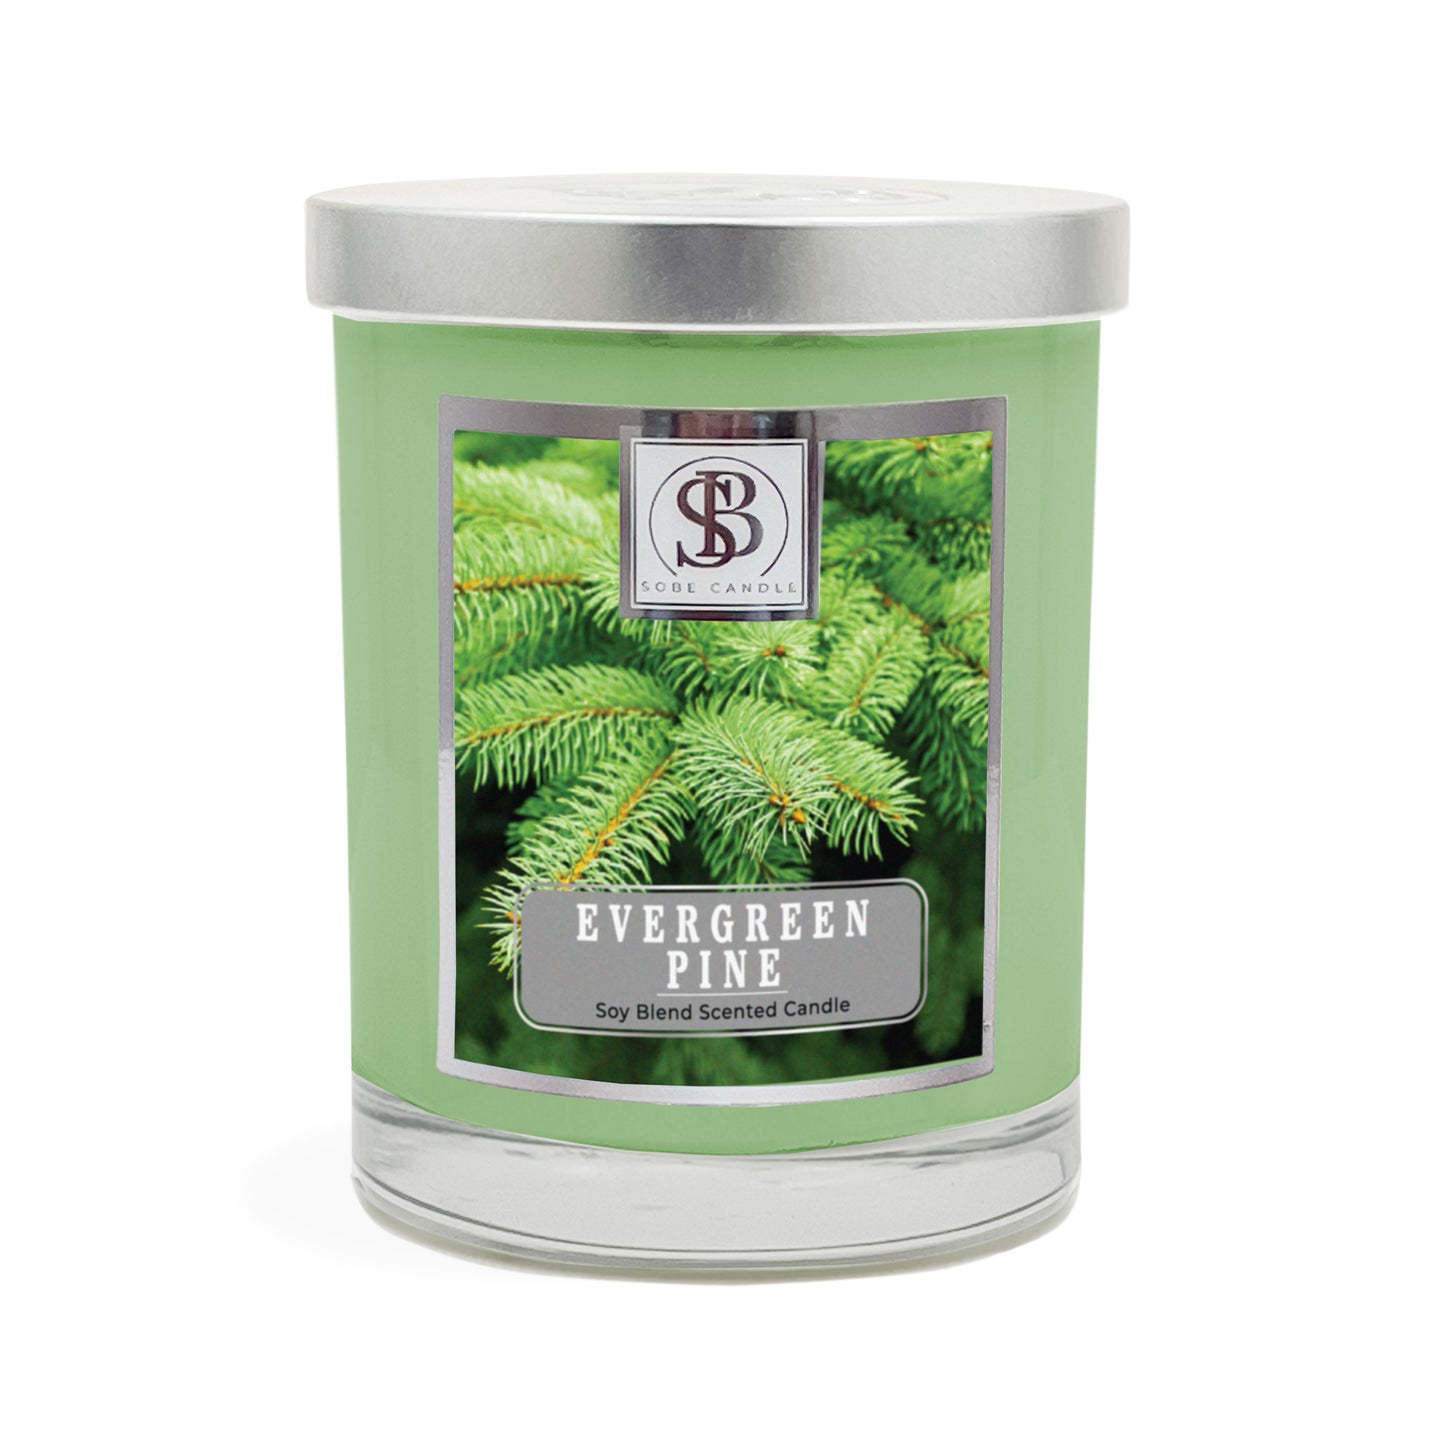 EVERGREEN PINE | Soy Scented Candle 11 oz